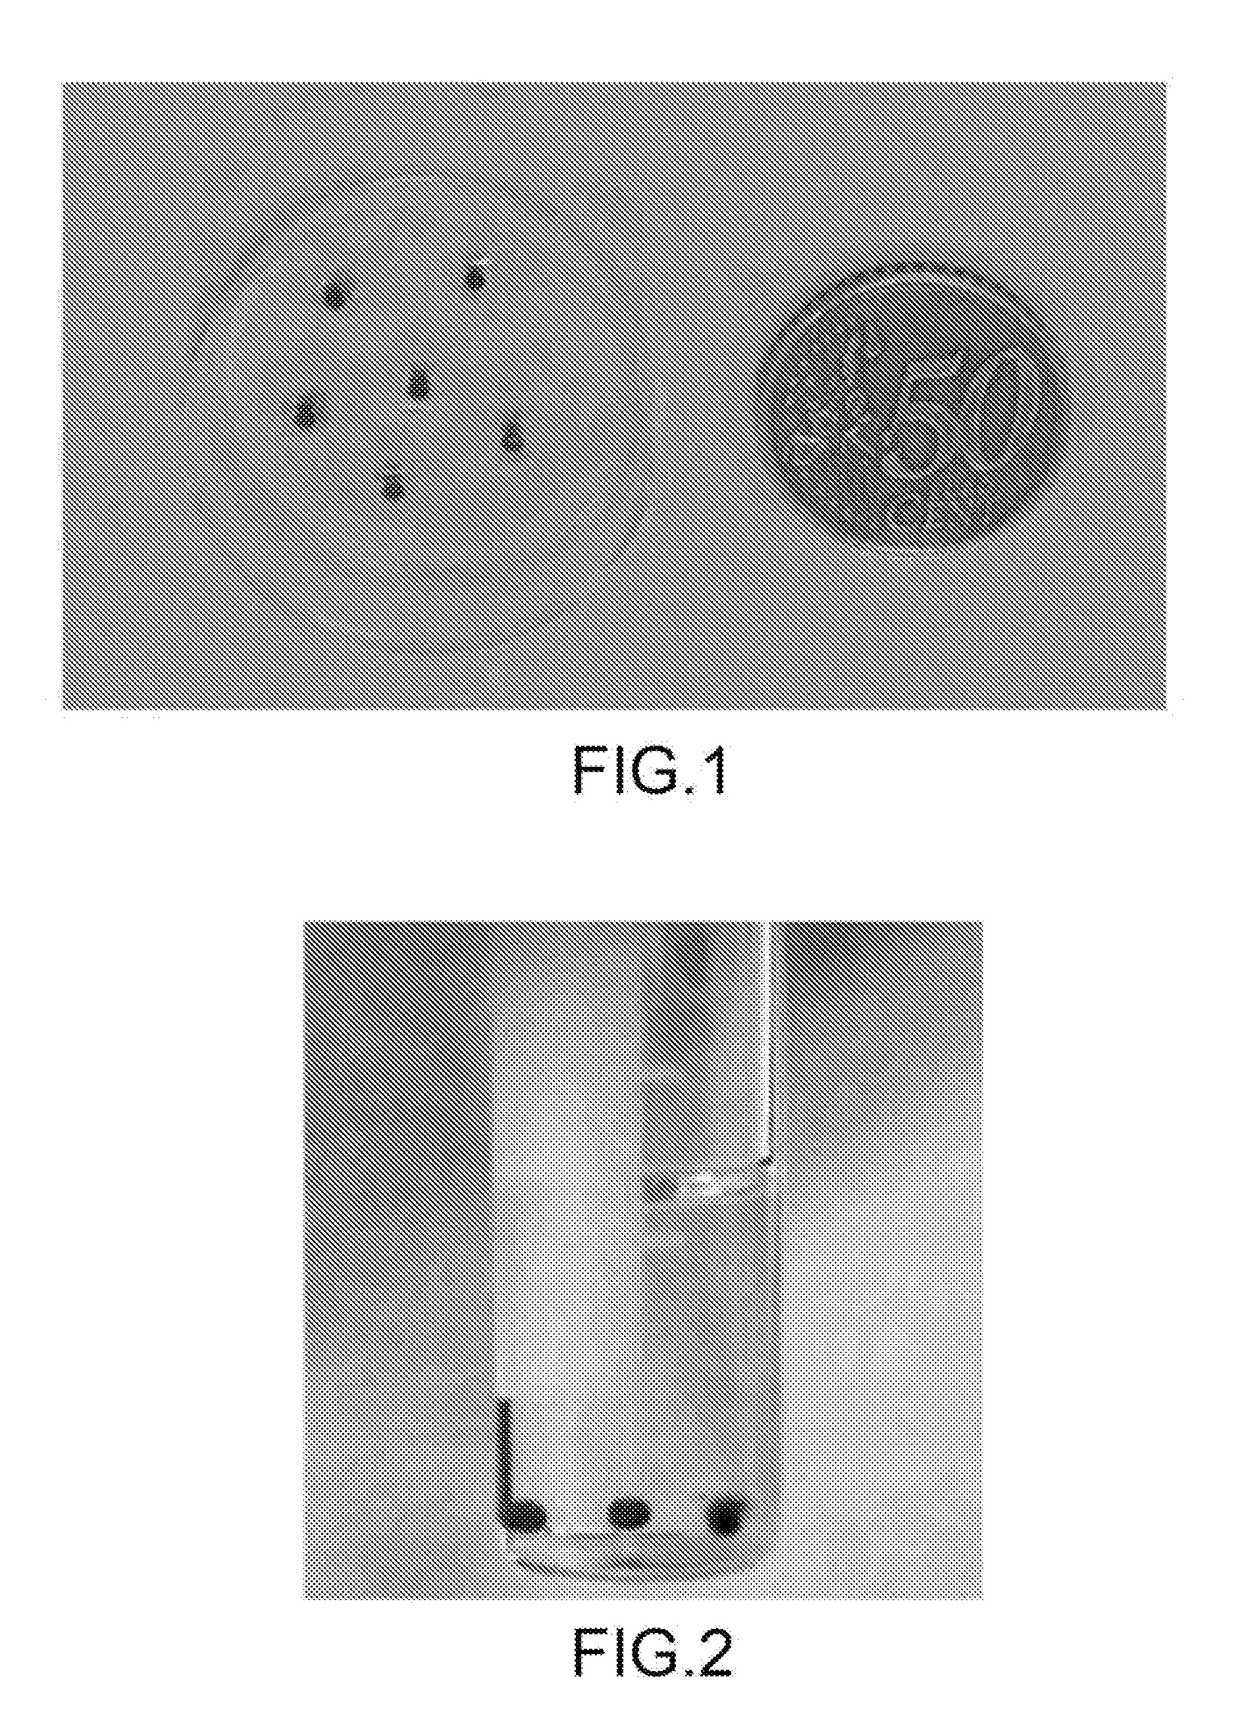 Fiducial marker for use in stereotactic radiosurgery and process of production